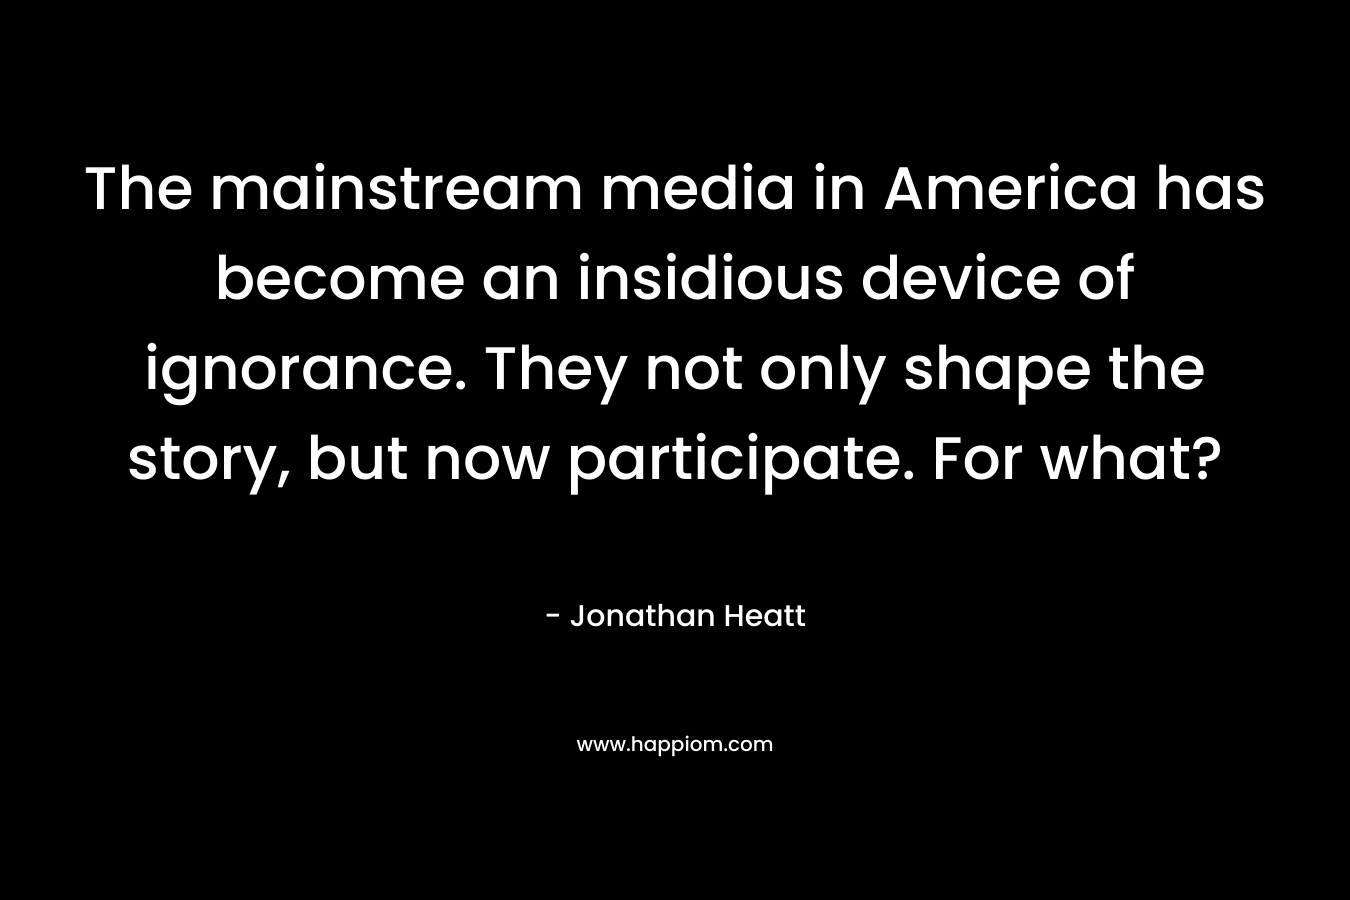 The mainstream media in America has become an insidious device of ignorance. They not only shape the story, but now participate. For what?